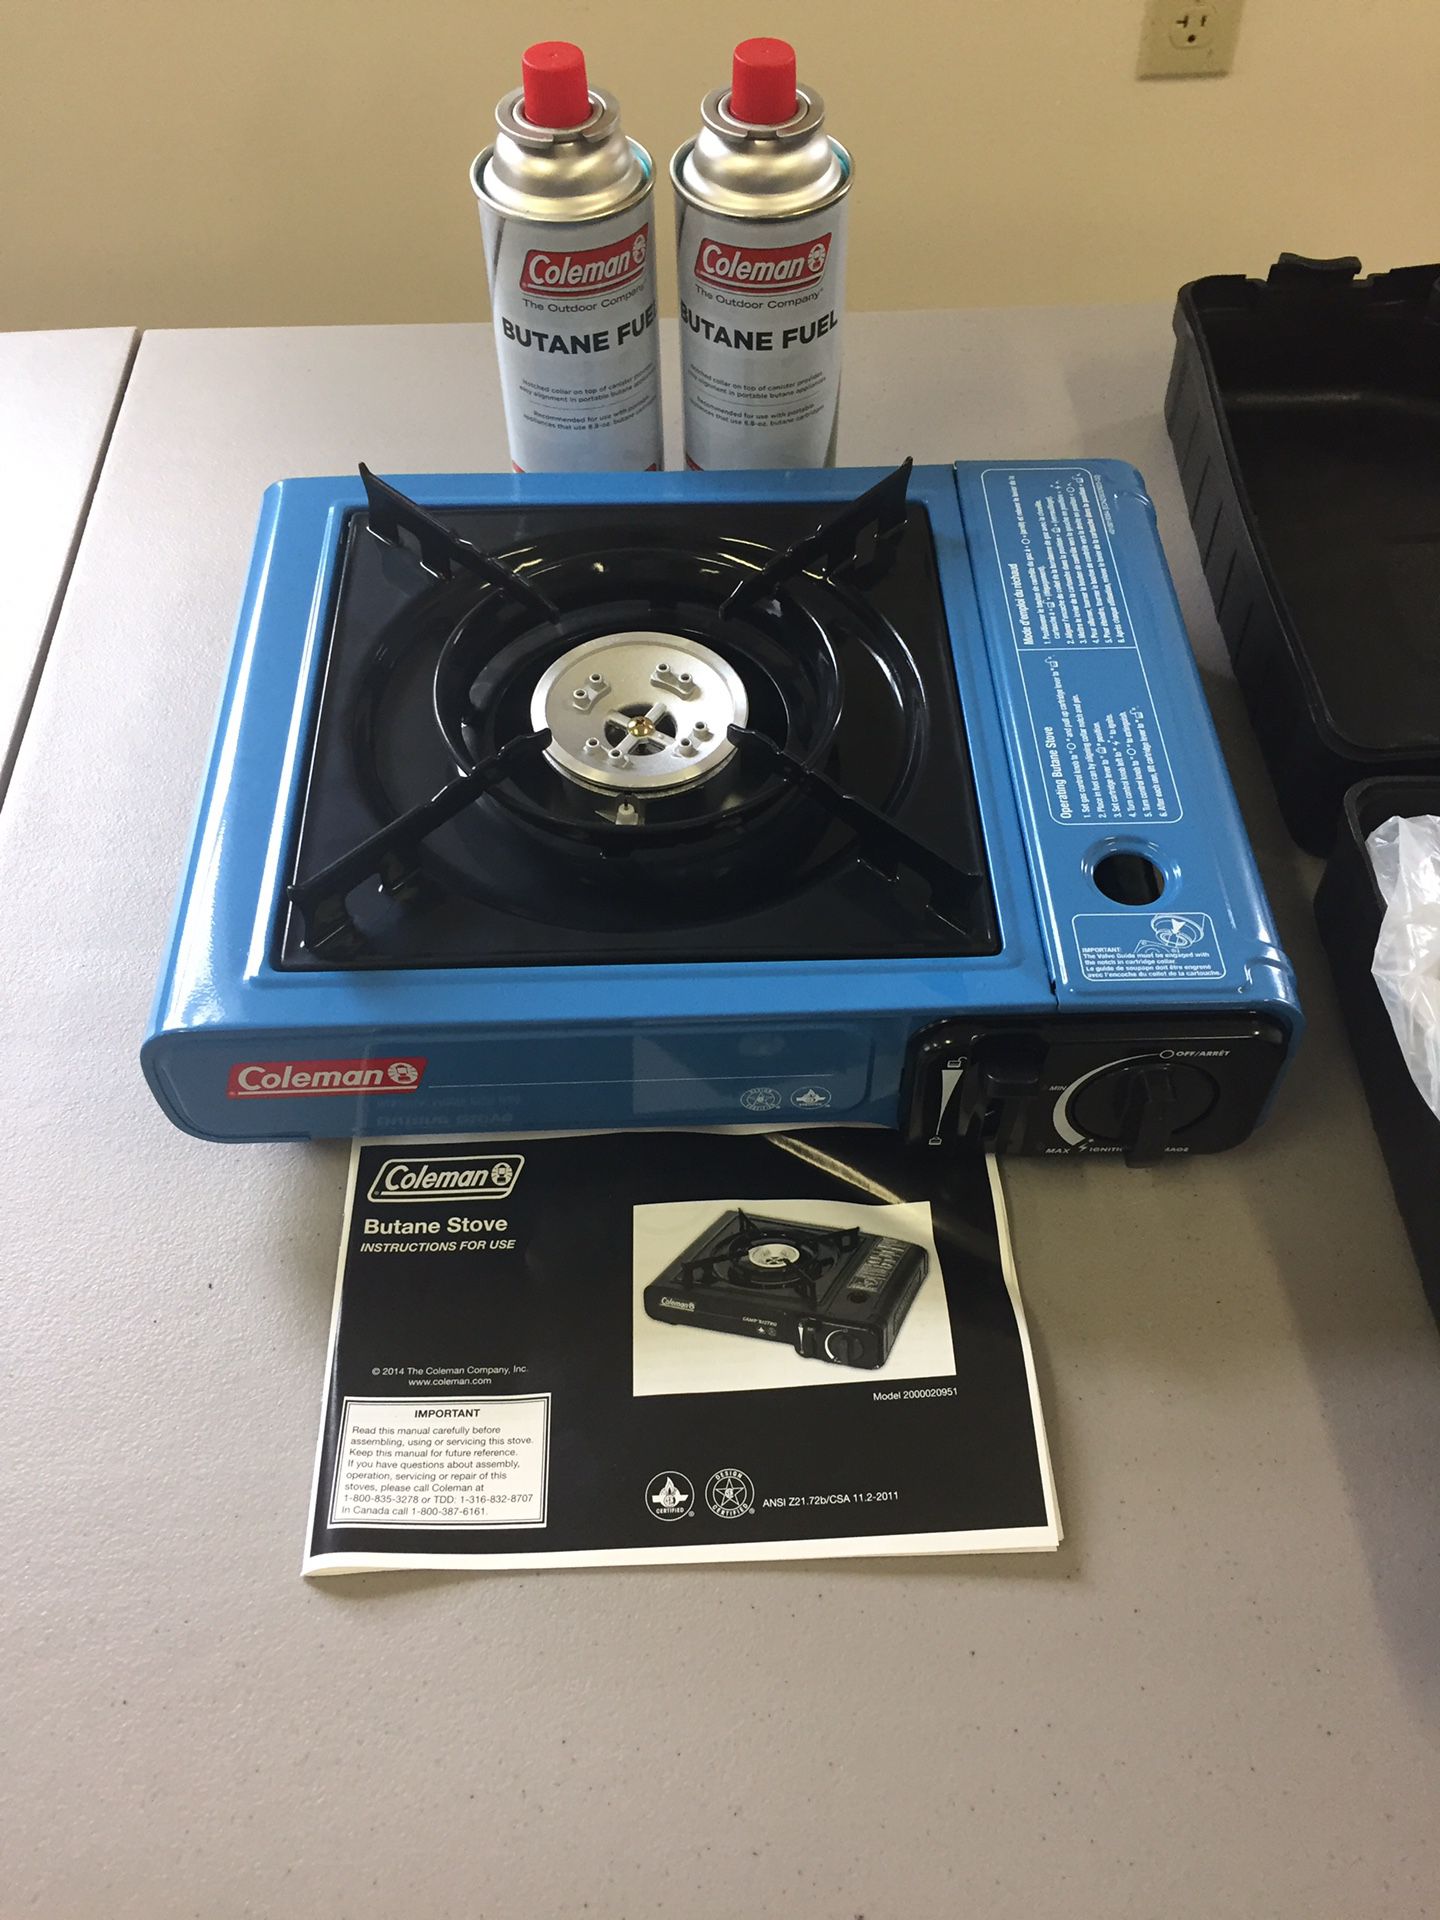 Brand New Coleman Portable Burner With 2 Full Tanks And Storage Container!